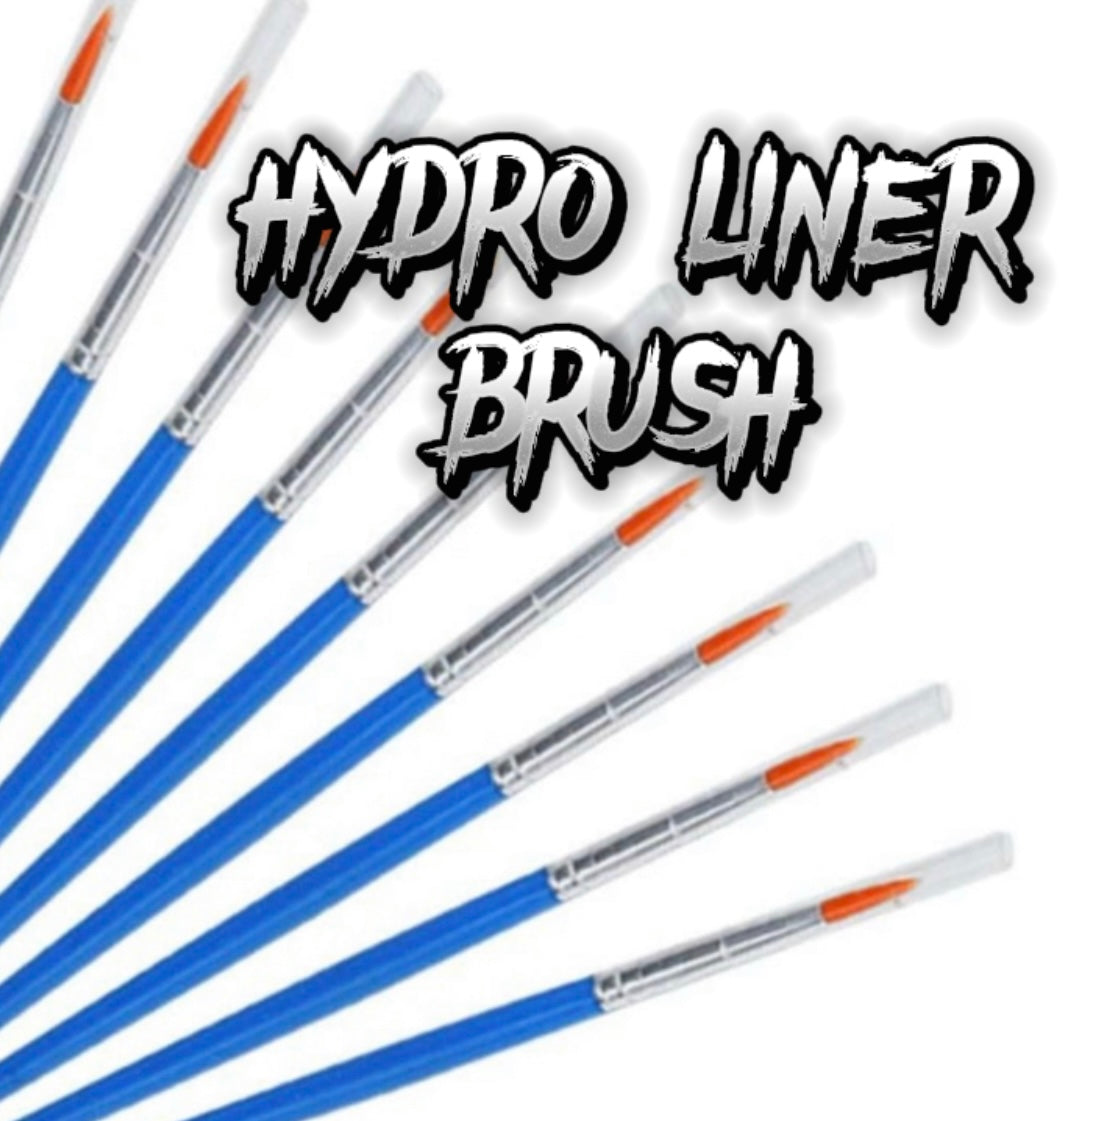 Hydro Liner Brush *SOLD INDIVIDUALLY*